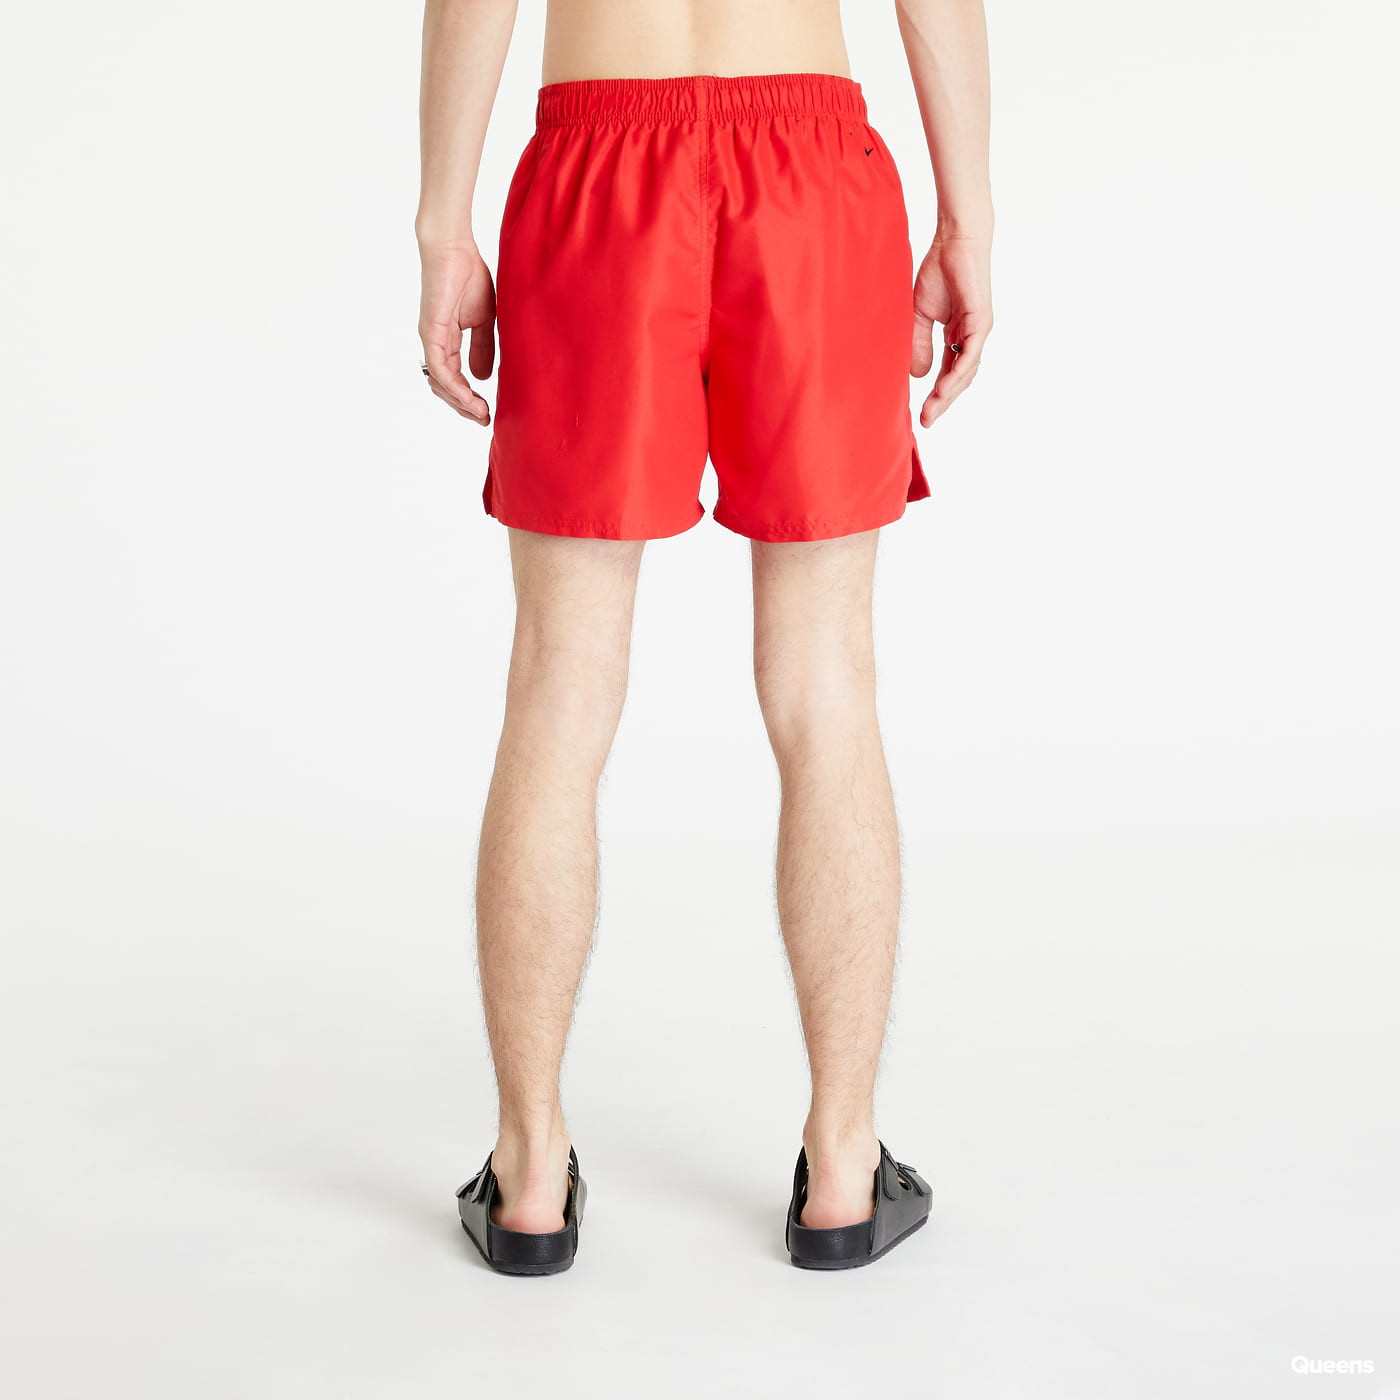 Nike 5 inch Volley Swimming Shorts